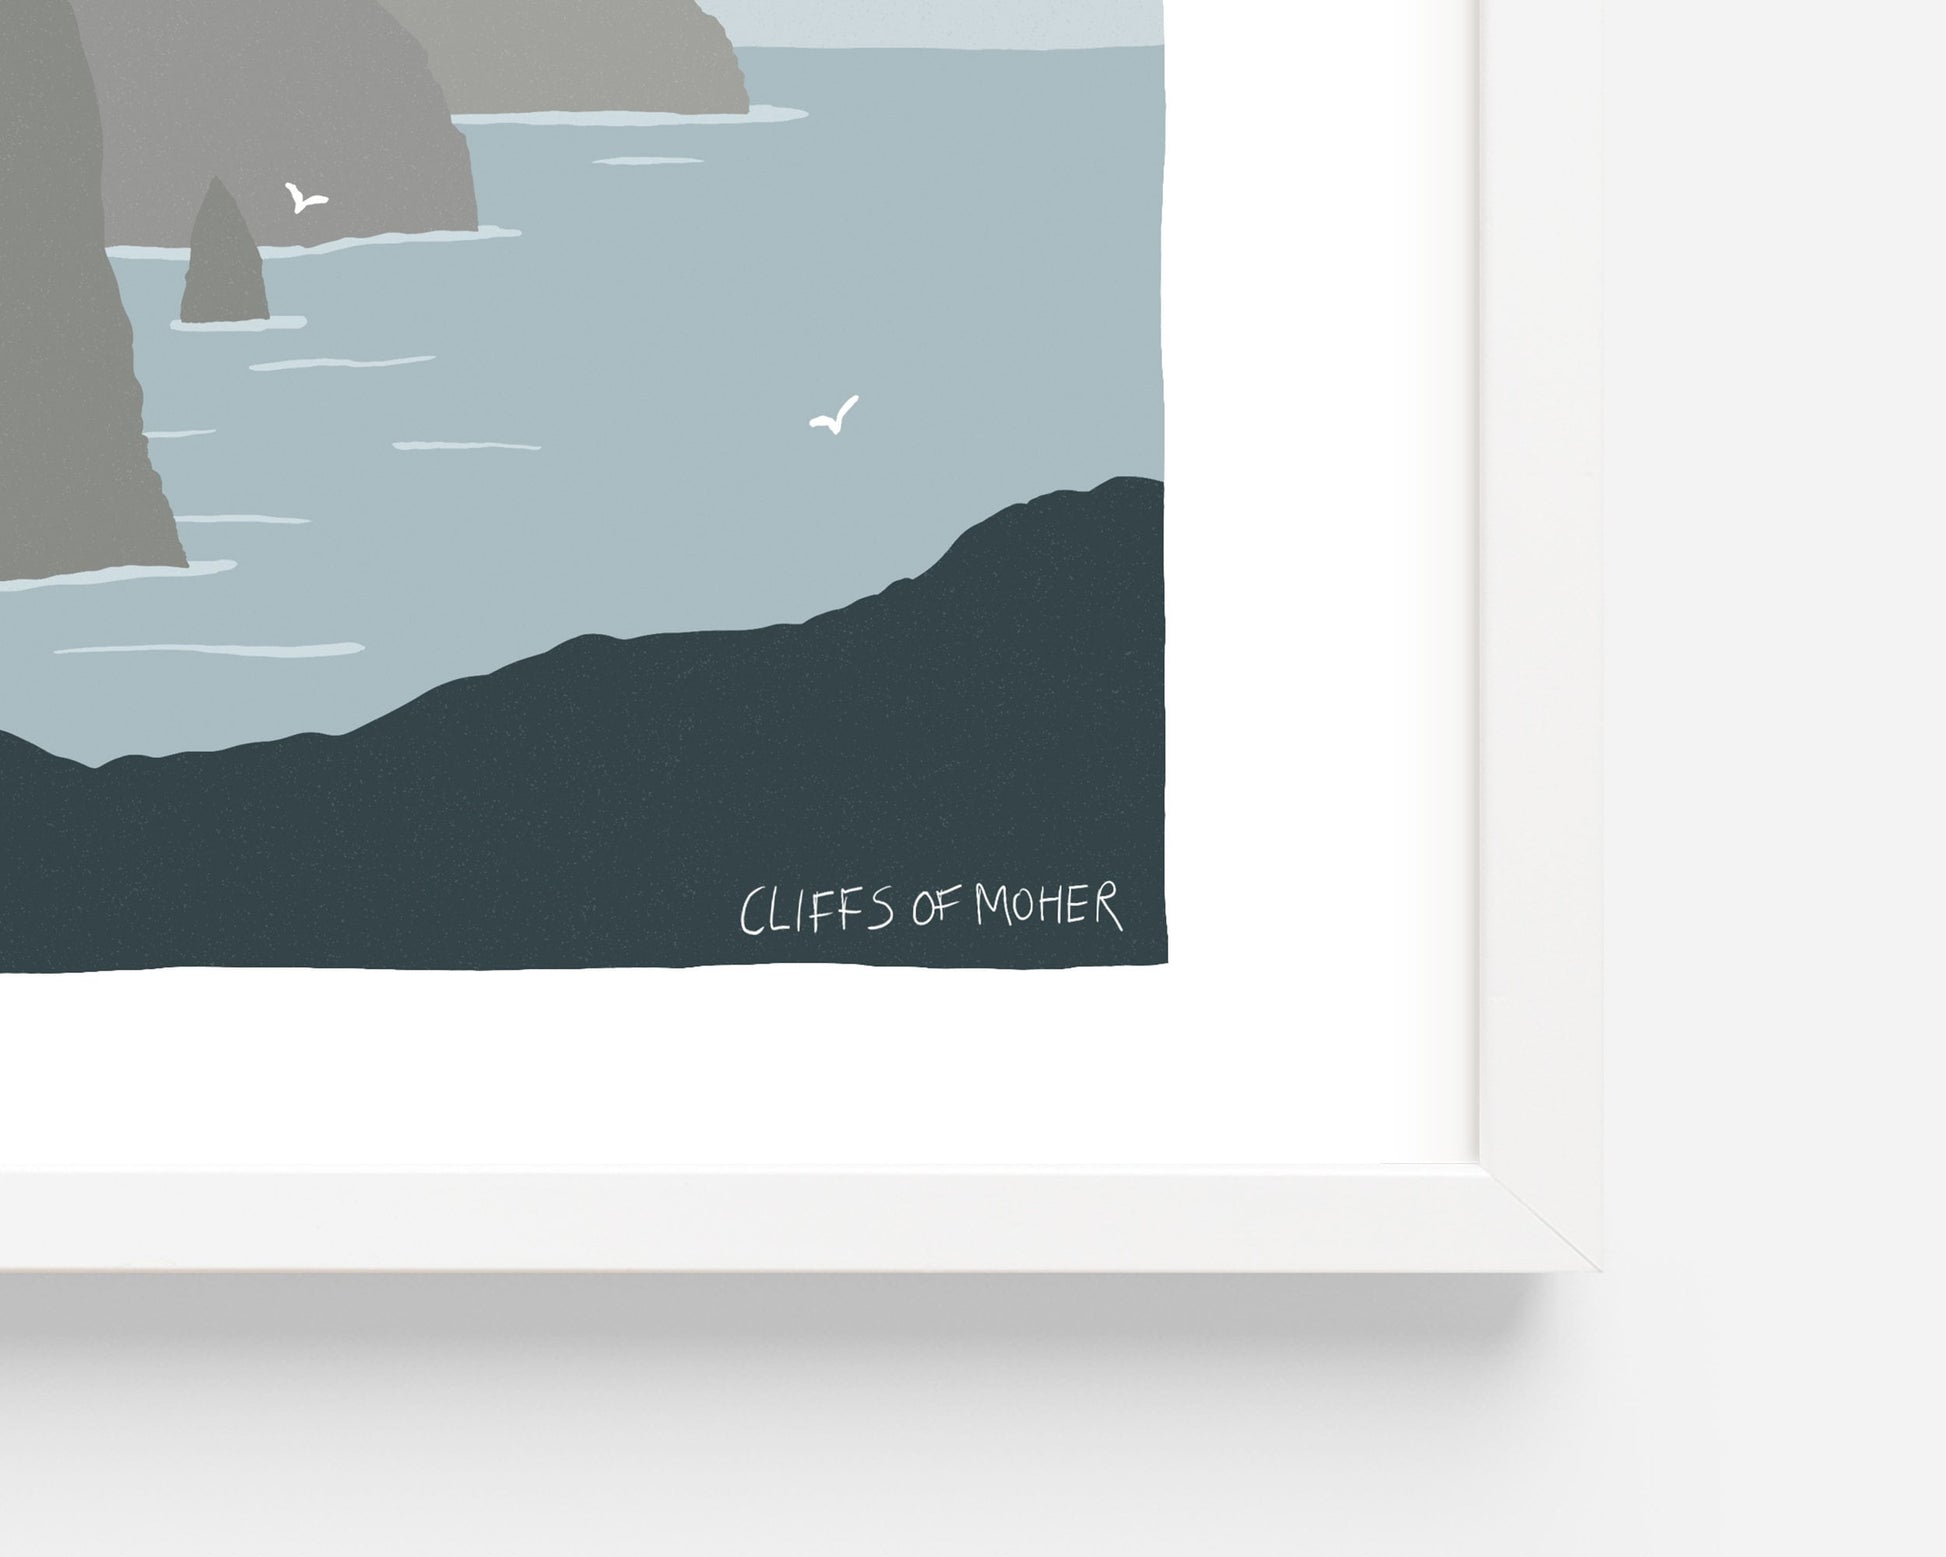 CLIFFS OF MOHER, Clare, Ireland – A4 / A3 print